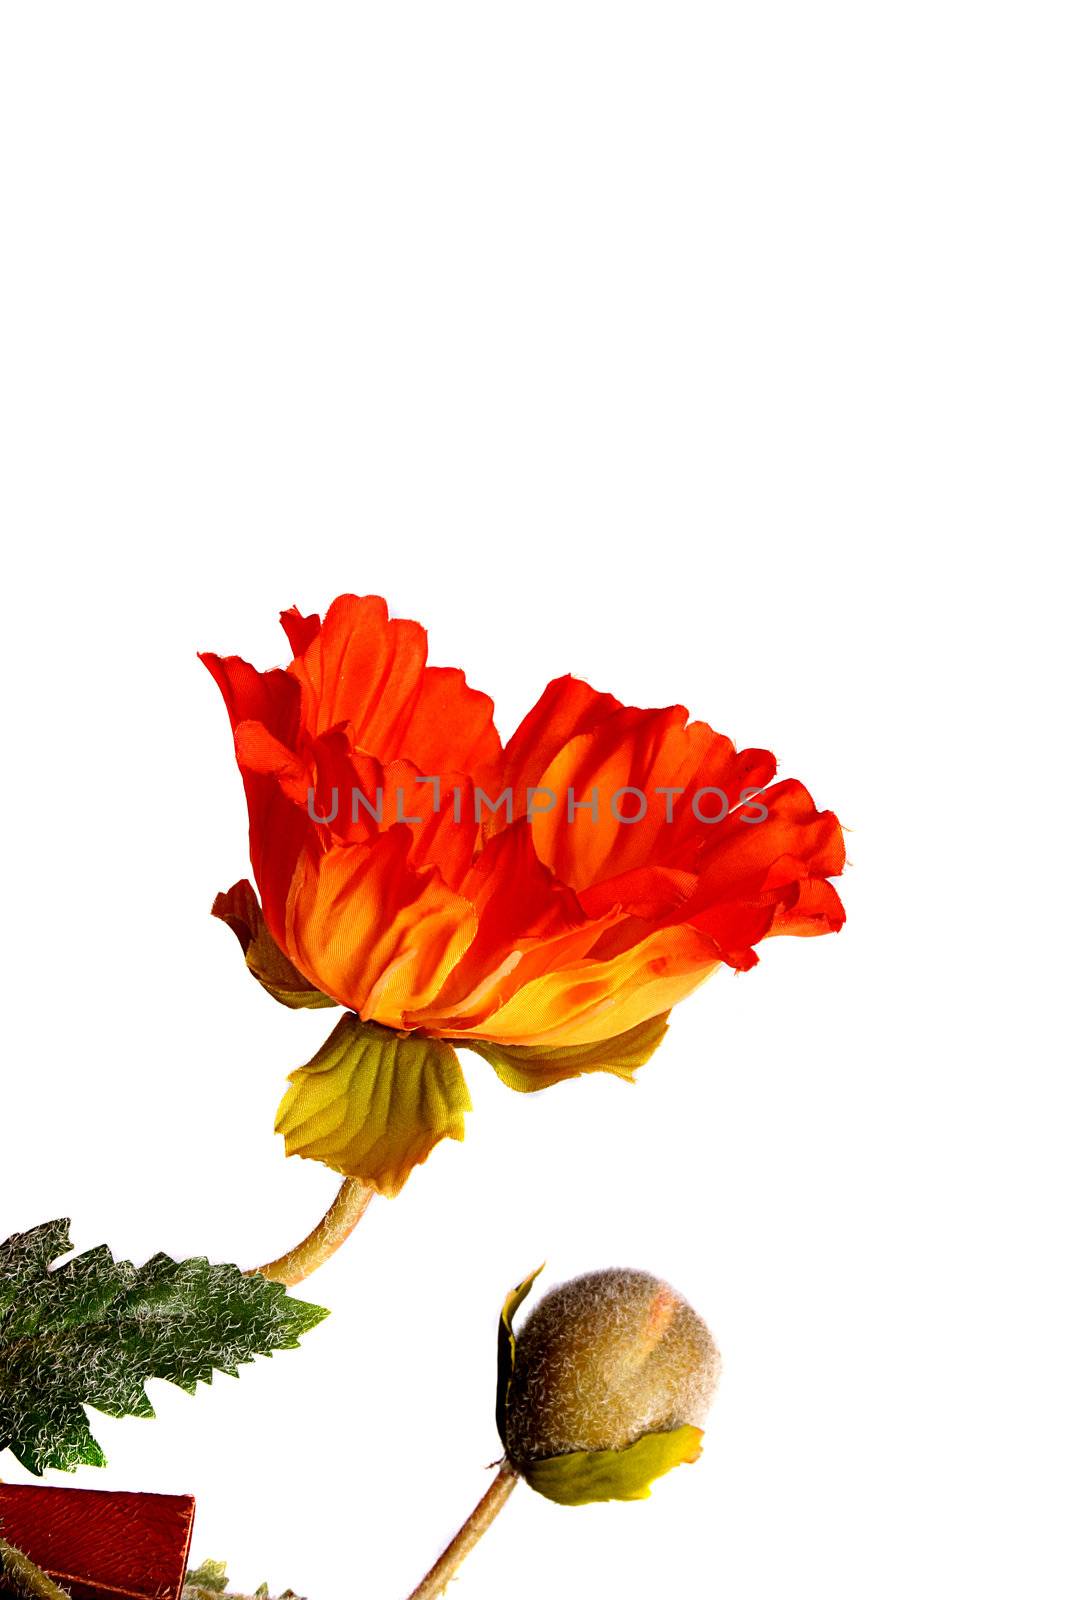 Artificial flower of a poppy with a bud on a white background.